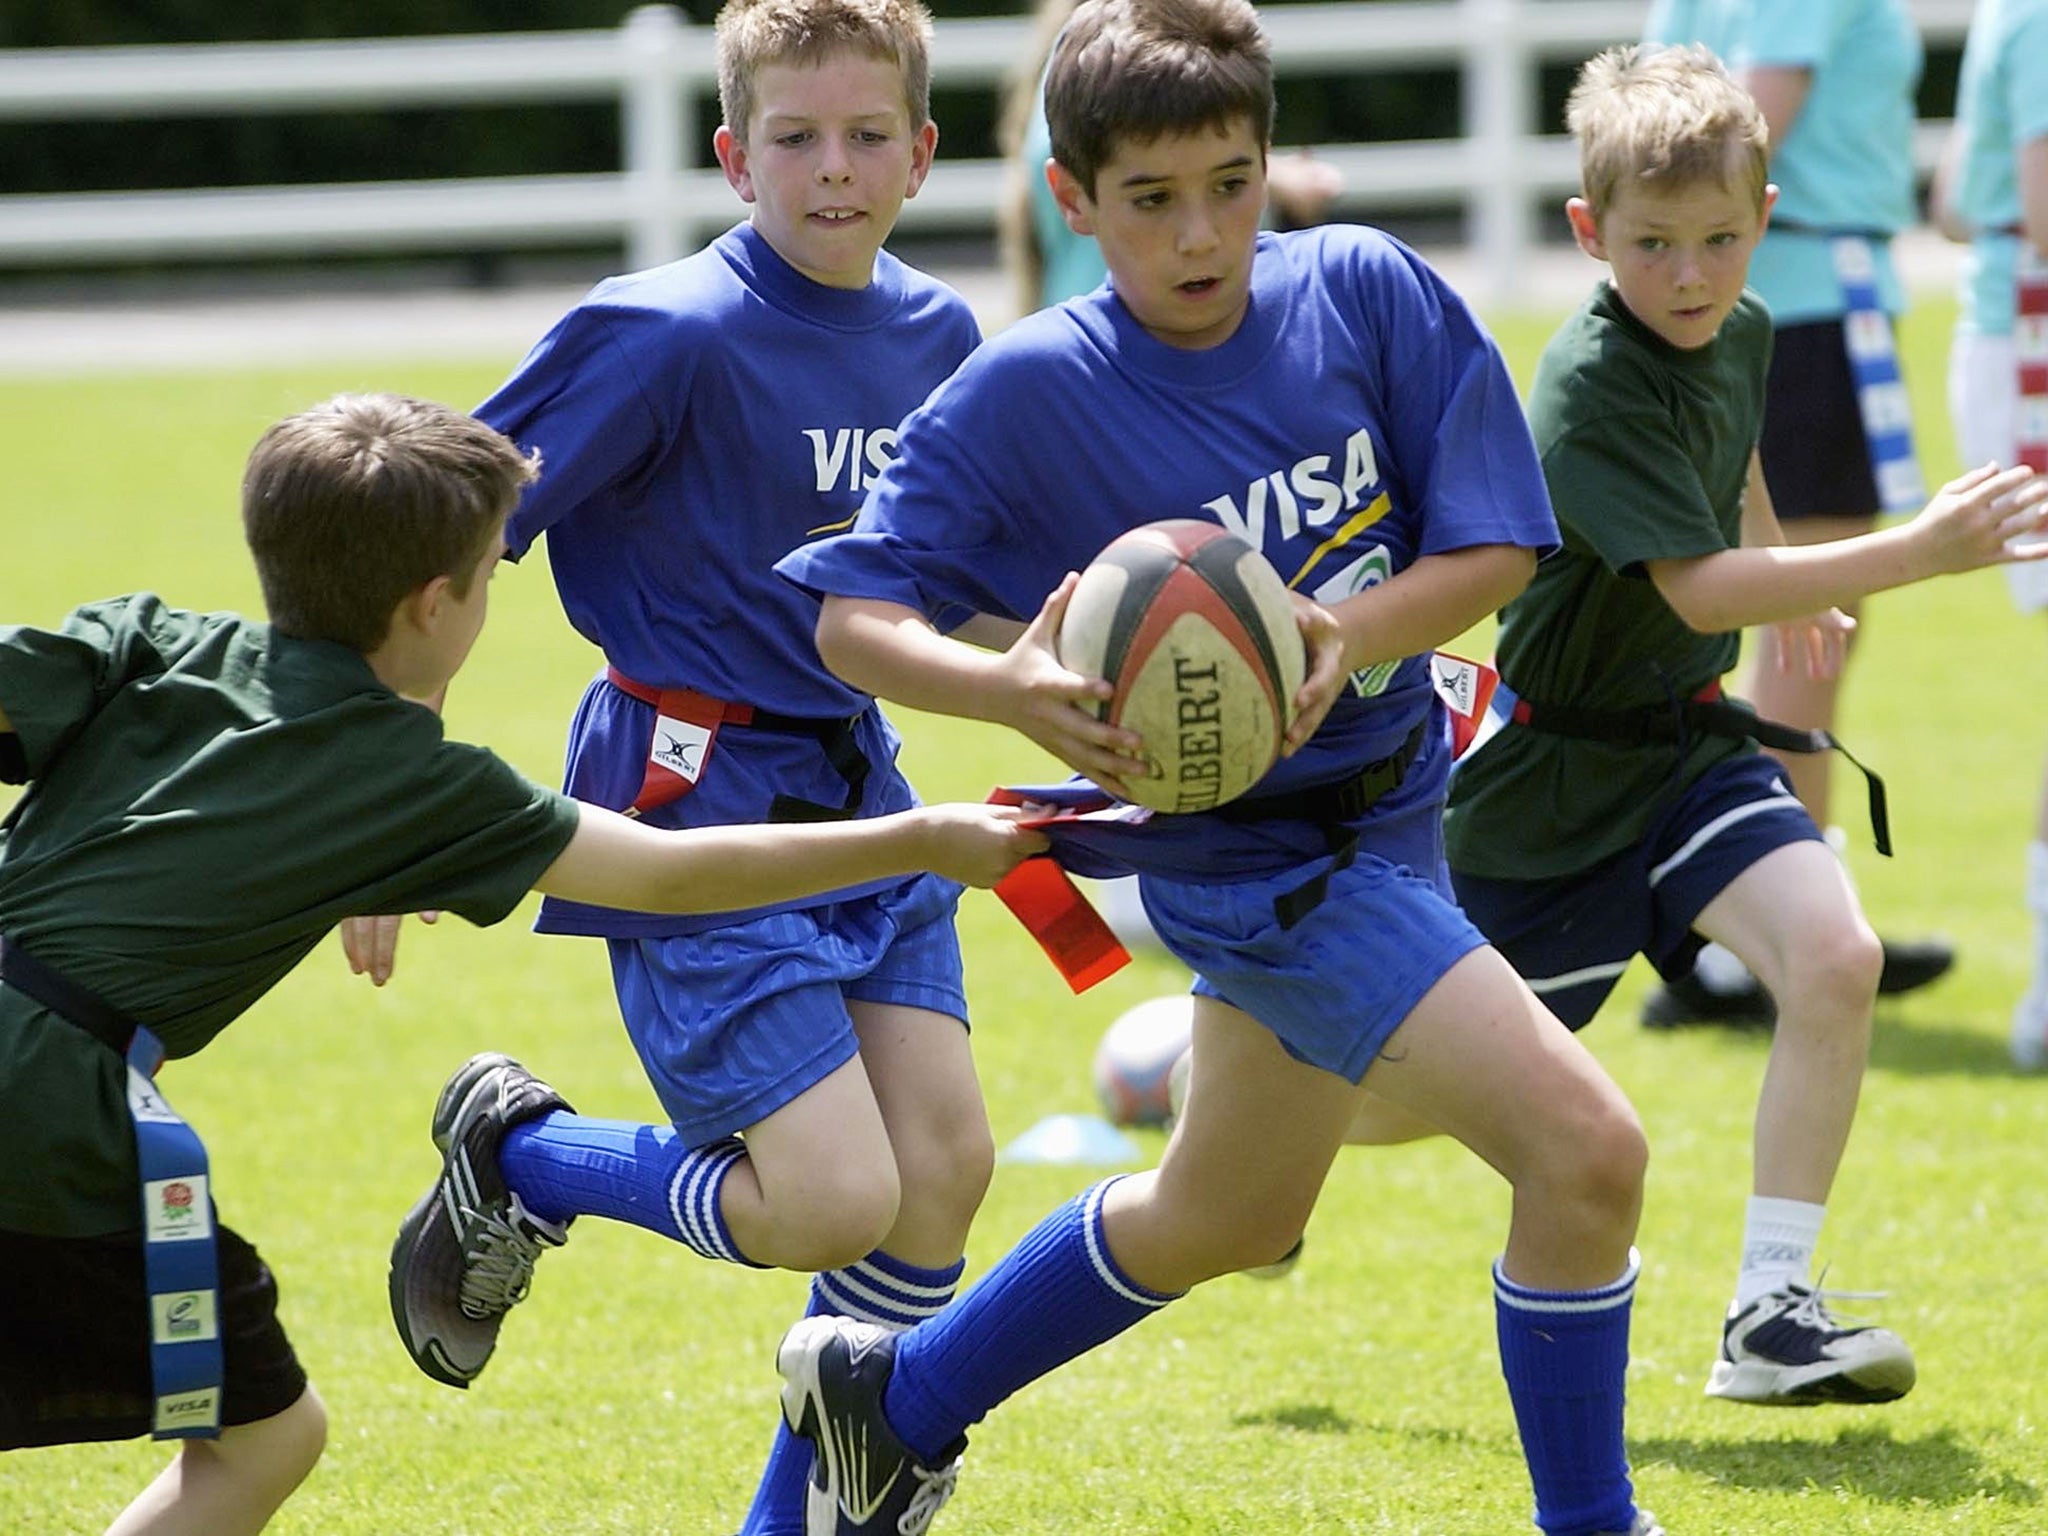 A love of sport needs to be sown early if children and adults are to live healthily